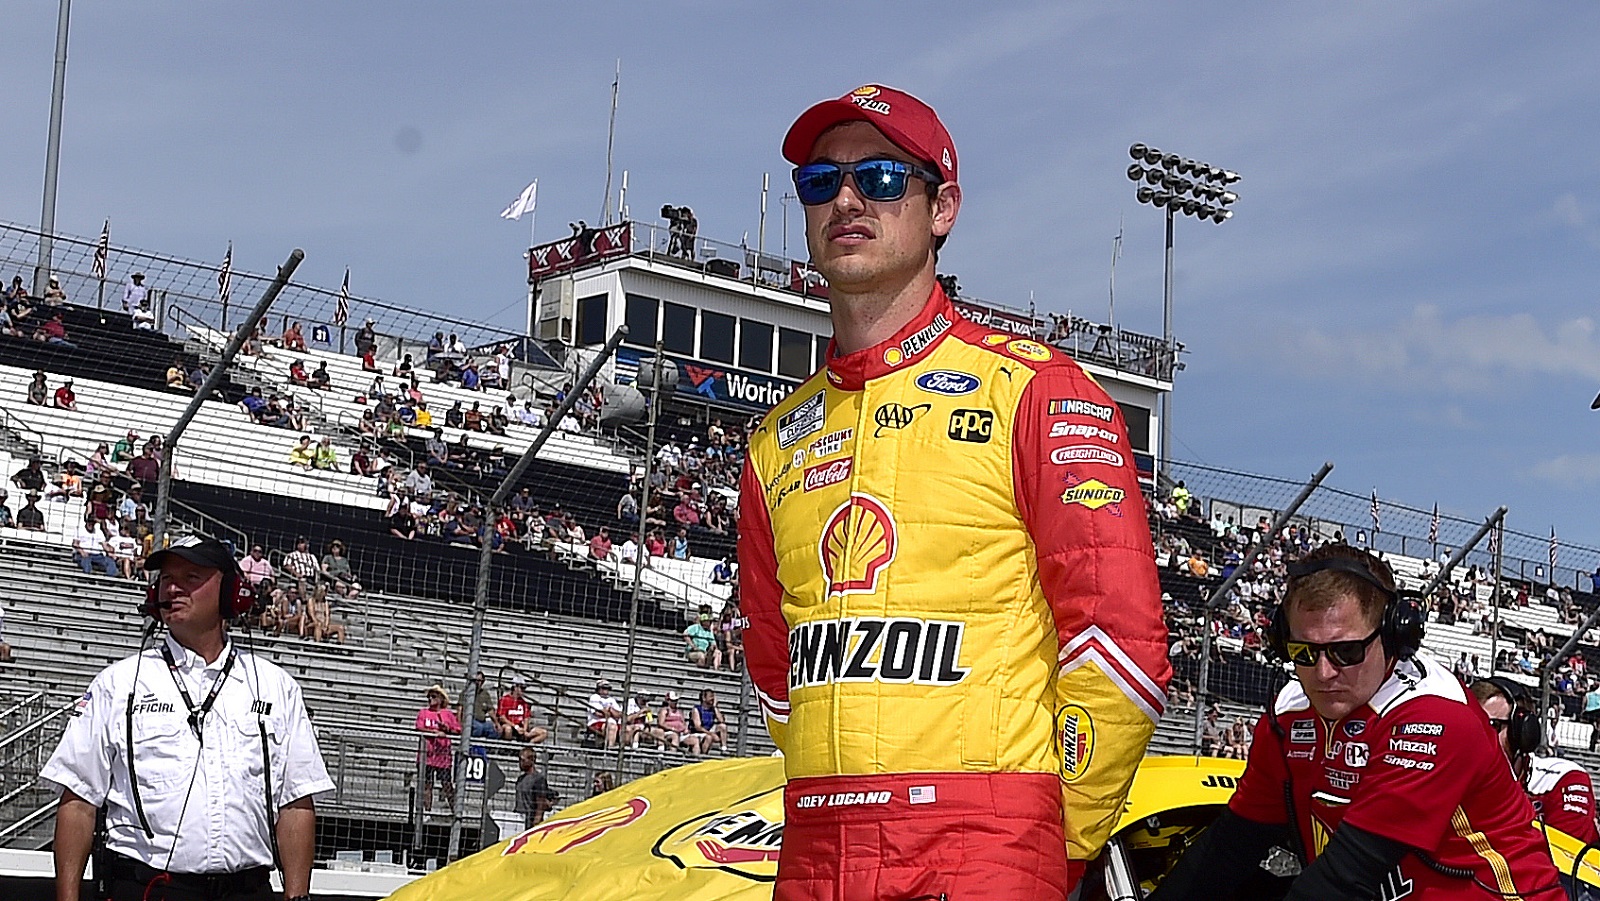 Joey Logano walks the grid during qualifying for the NASCAR Cup Series Enjoy Illinois 300 at WWT Raceway on June 4, 2022. | Jeff Curry/Getty Images